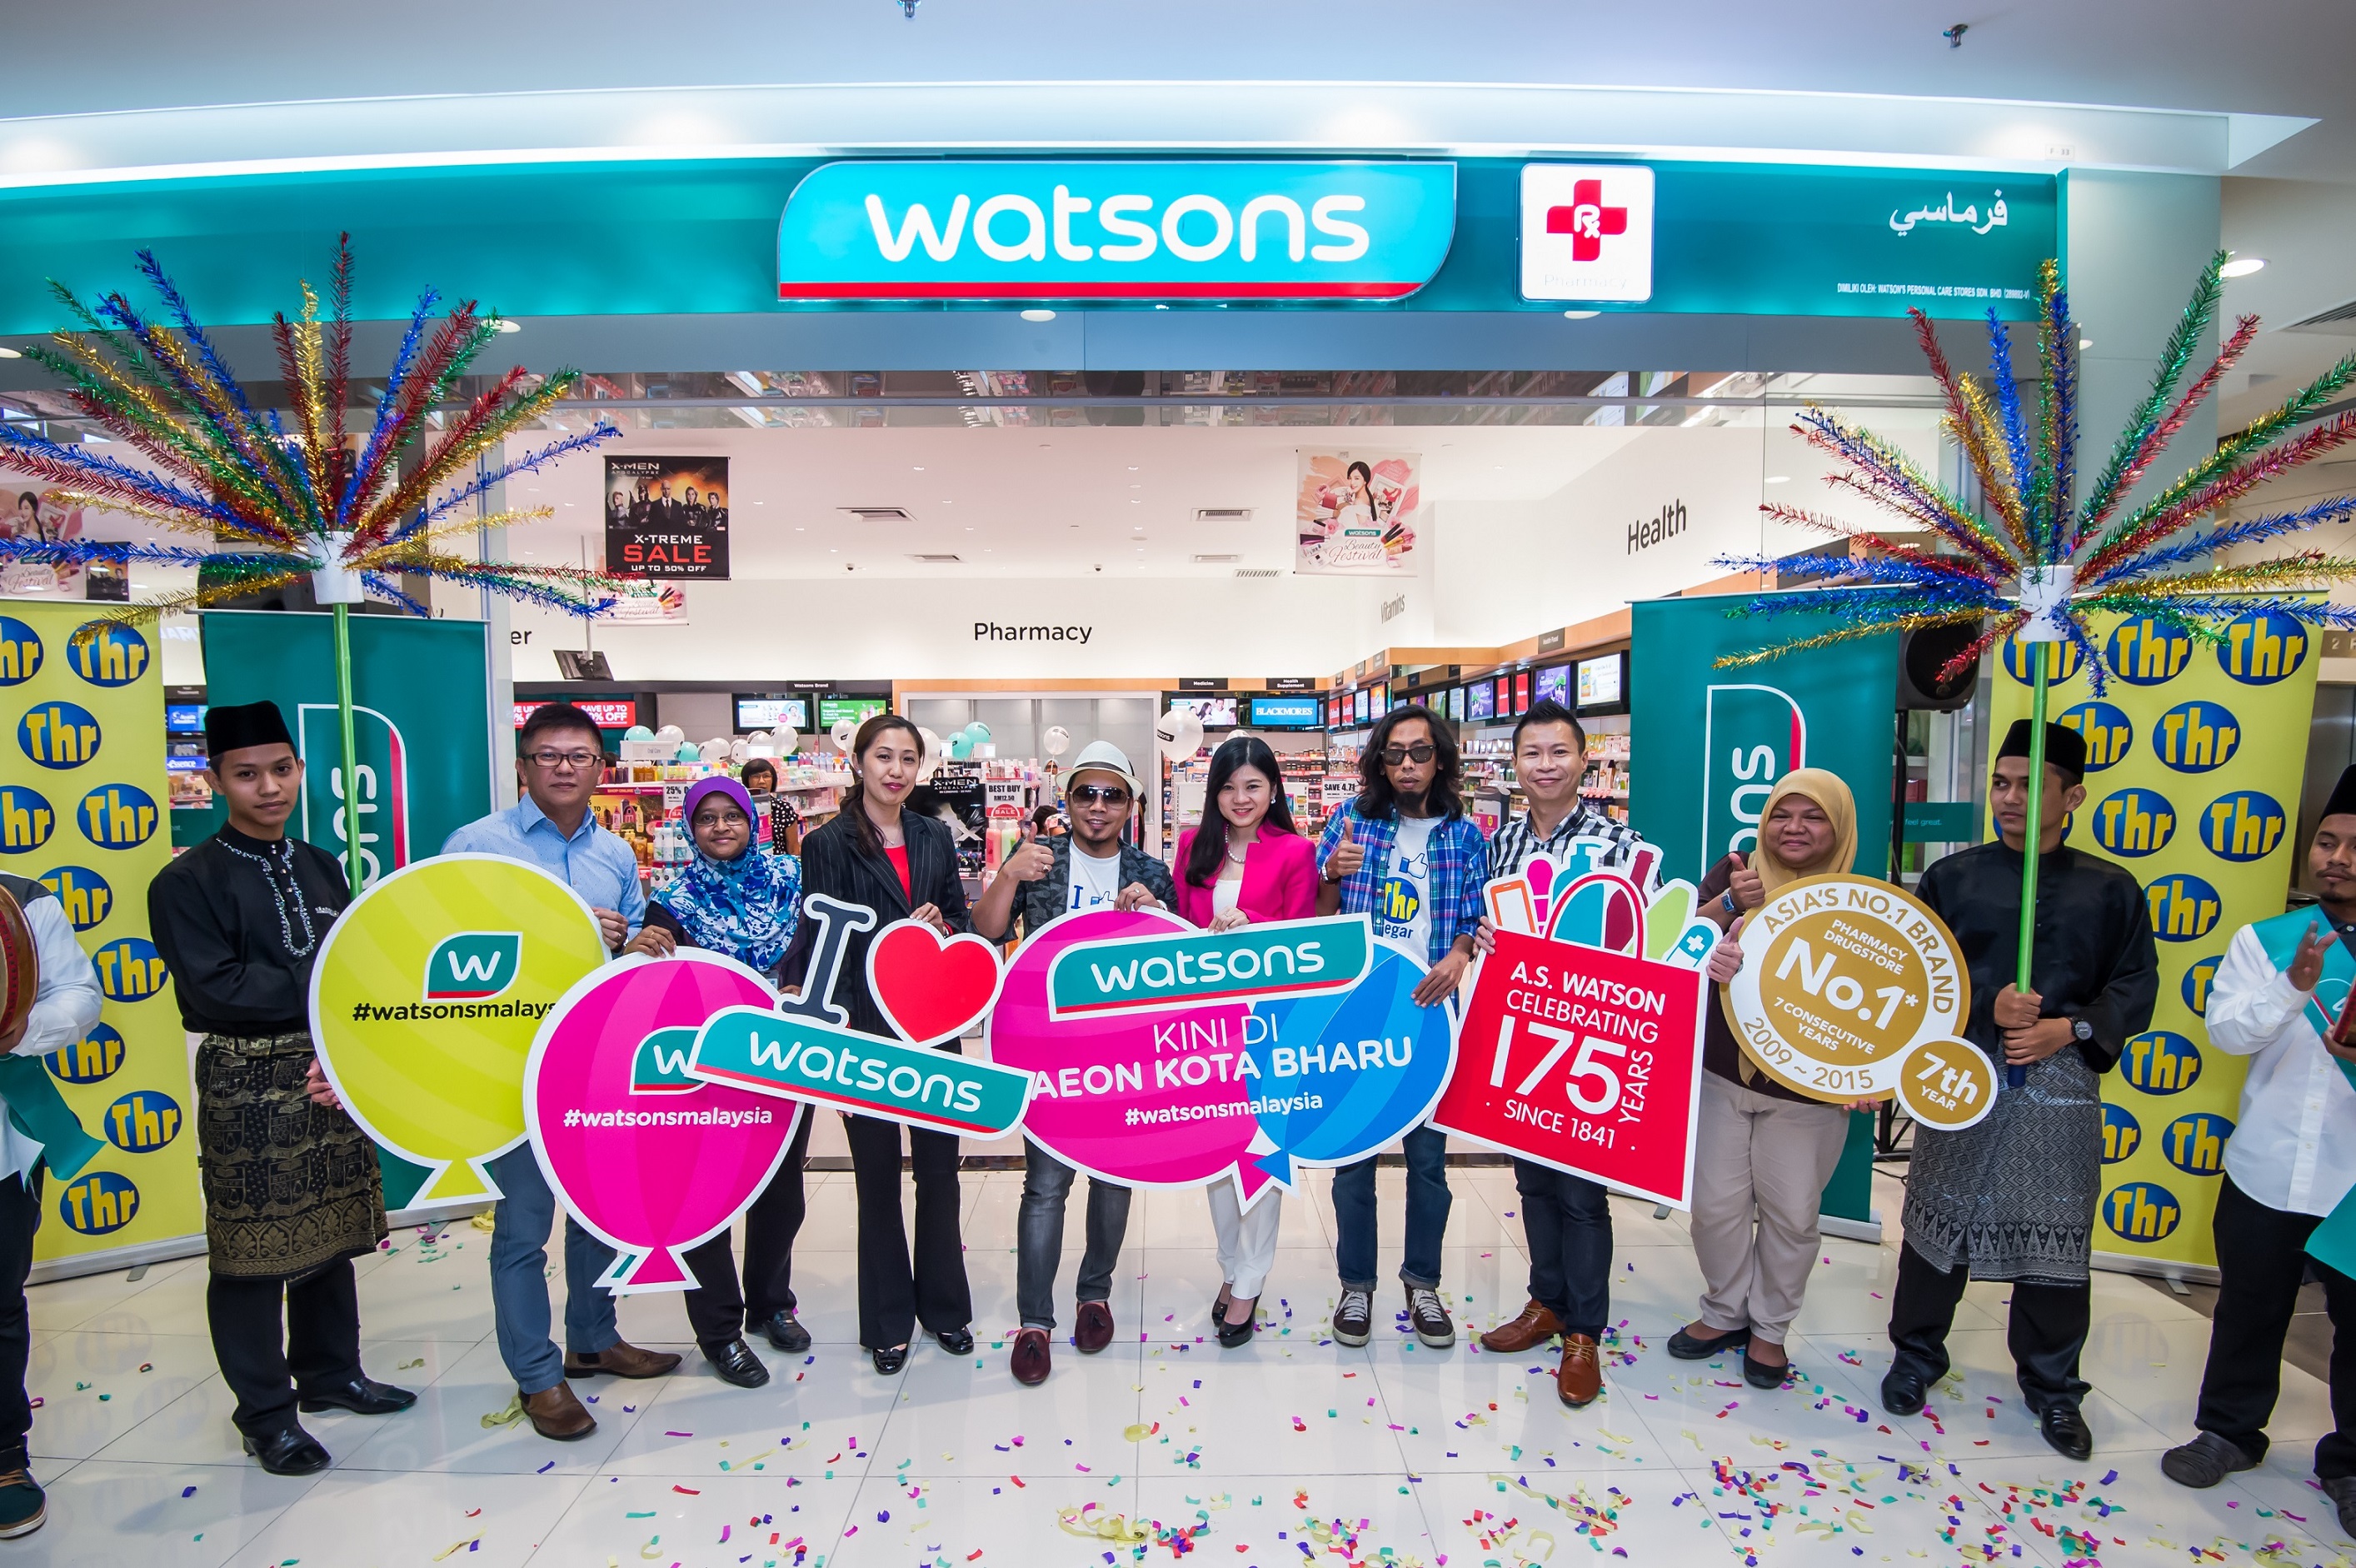 (From Left): Caryn Loh, Chief Operating Officer Watsons Malaysia (5th from right) is flanked by DJ Shah and DJ Nazz from THR Gegar radio at the opening of Watsons new concept store at AEON Mall Kota Bharu, Kelantan. Also from left is Danel Looi, Director of Operations, Watsons Malaysia, Norlizawati Mohamad Yusup, Area Sales Manager, Watsons Malaysia, Jessica Ng, Chief Customer Officer, Danny Hoh, Head of Marketing, Watsons Malaysia and Aziam Muhamad, Assistant Mall Manager, AEON Mall Kota Bharu. 